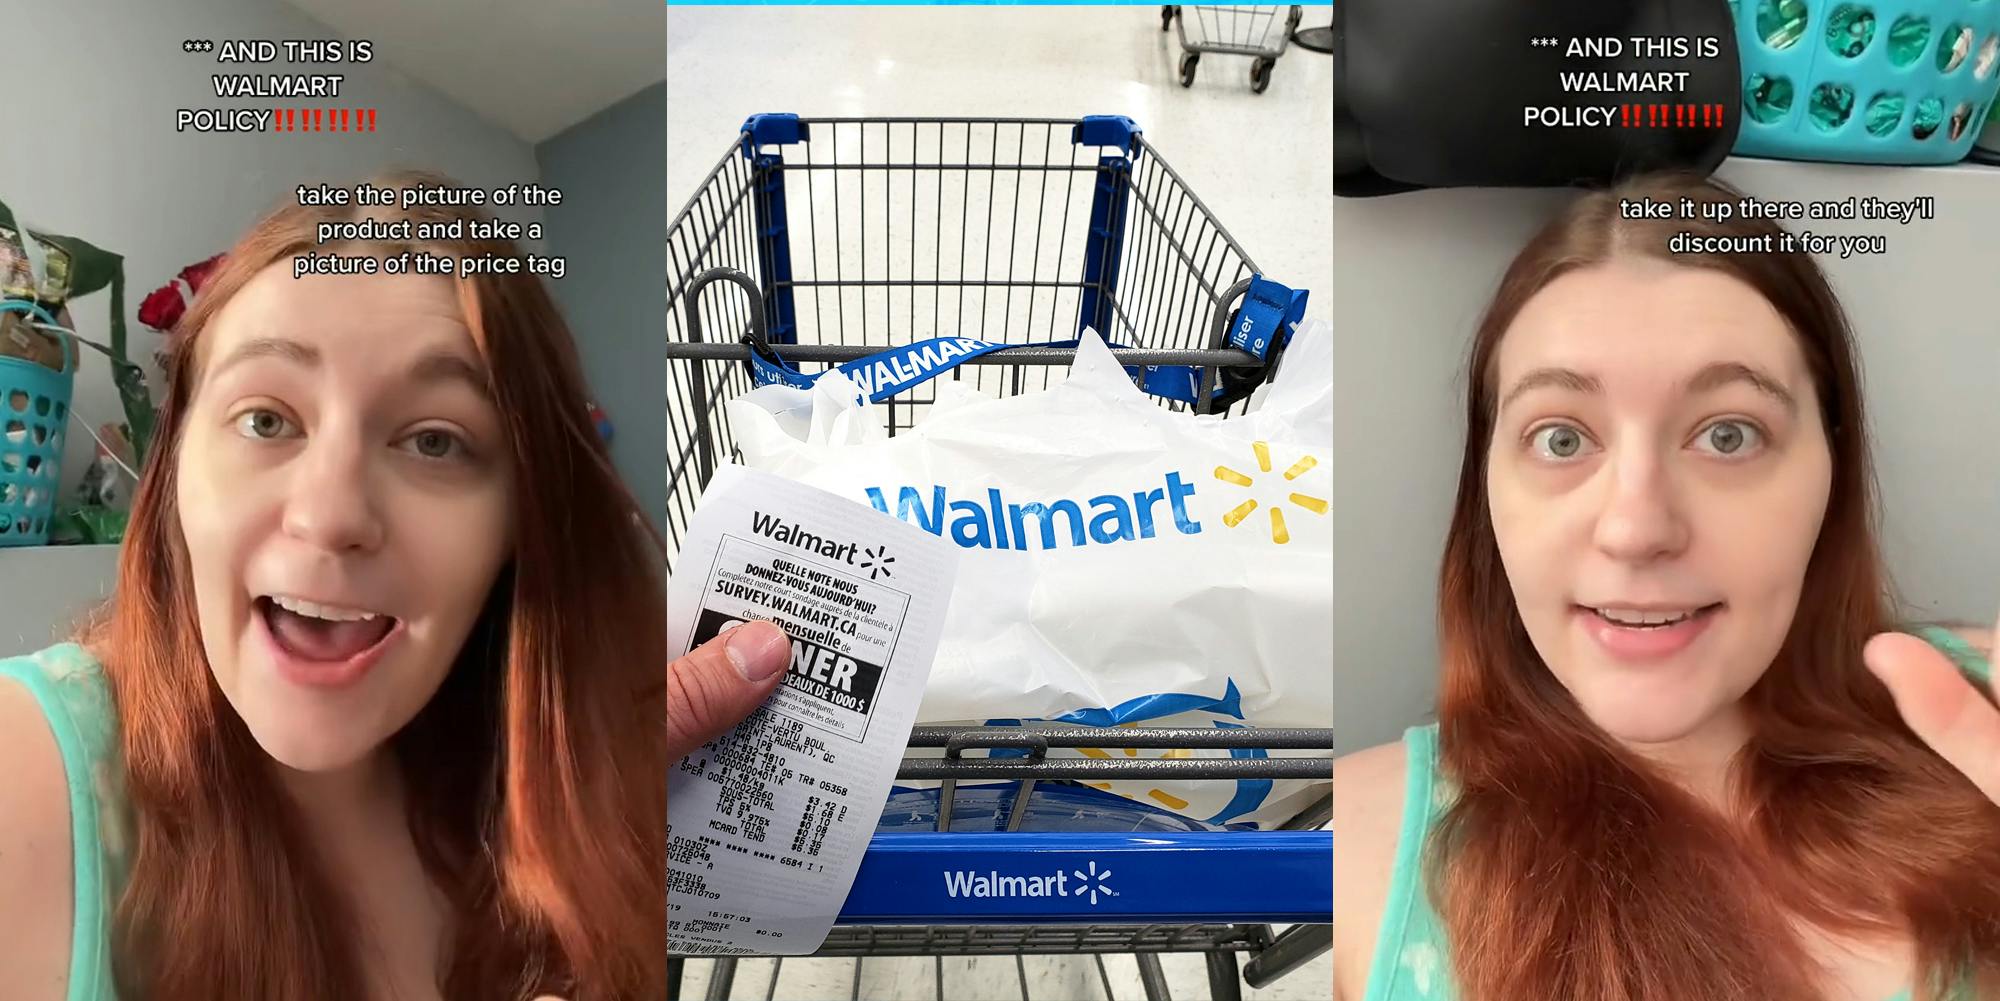 former Walmart employee speaking with caption "AND THIS IS WALMART POLICY" "take the picture of the product and take a picture of the price tag" (l) Walmart customer holding receipt with bag and cart (c) former Walmart employee speaking with caption "AND THIS IS WALMART POLICY" "take it up there and they'll discount it for you" (r)